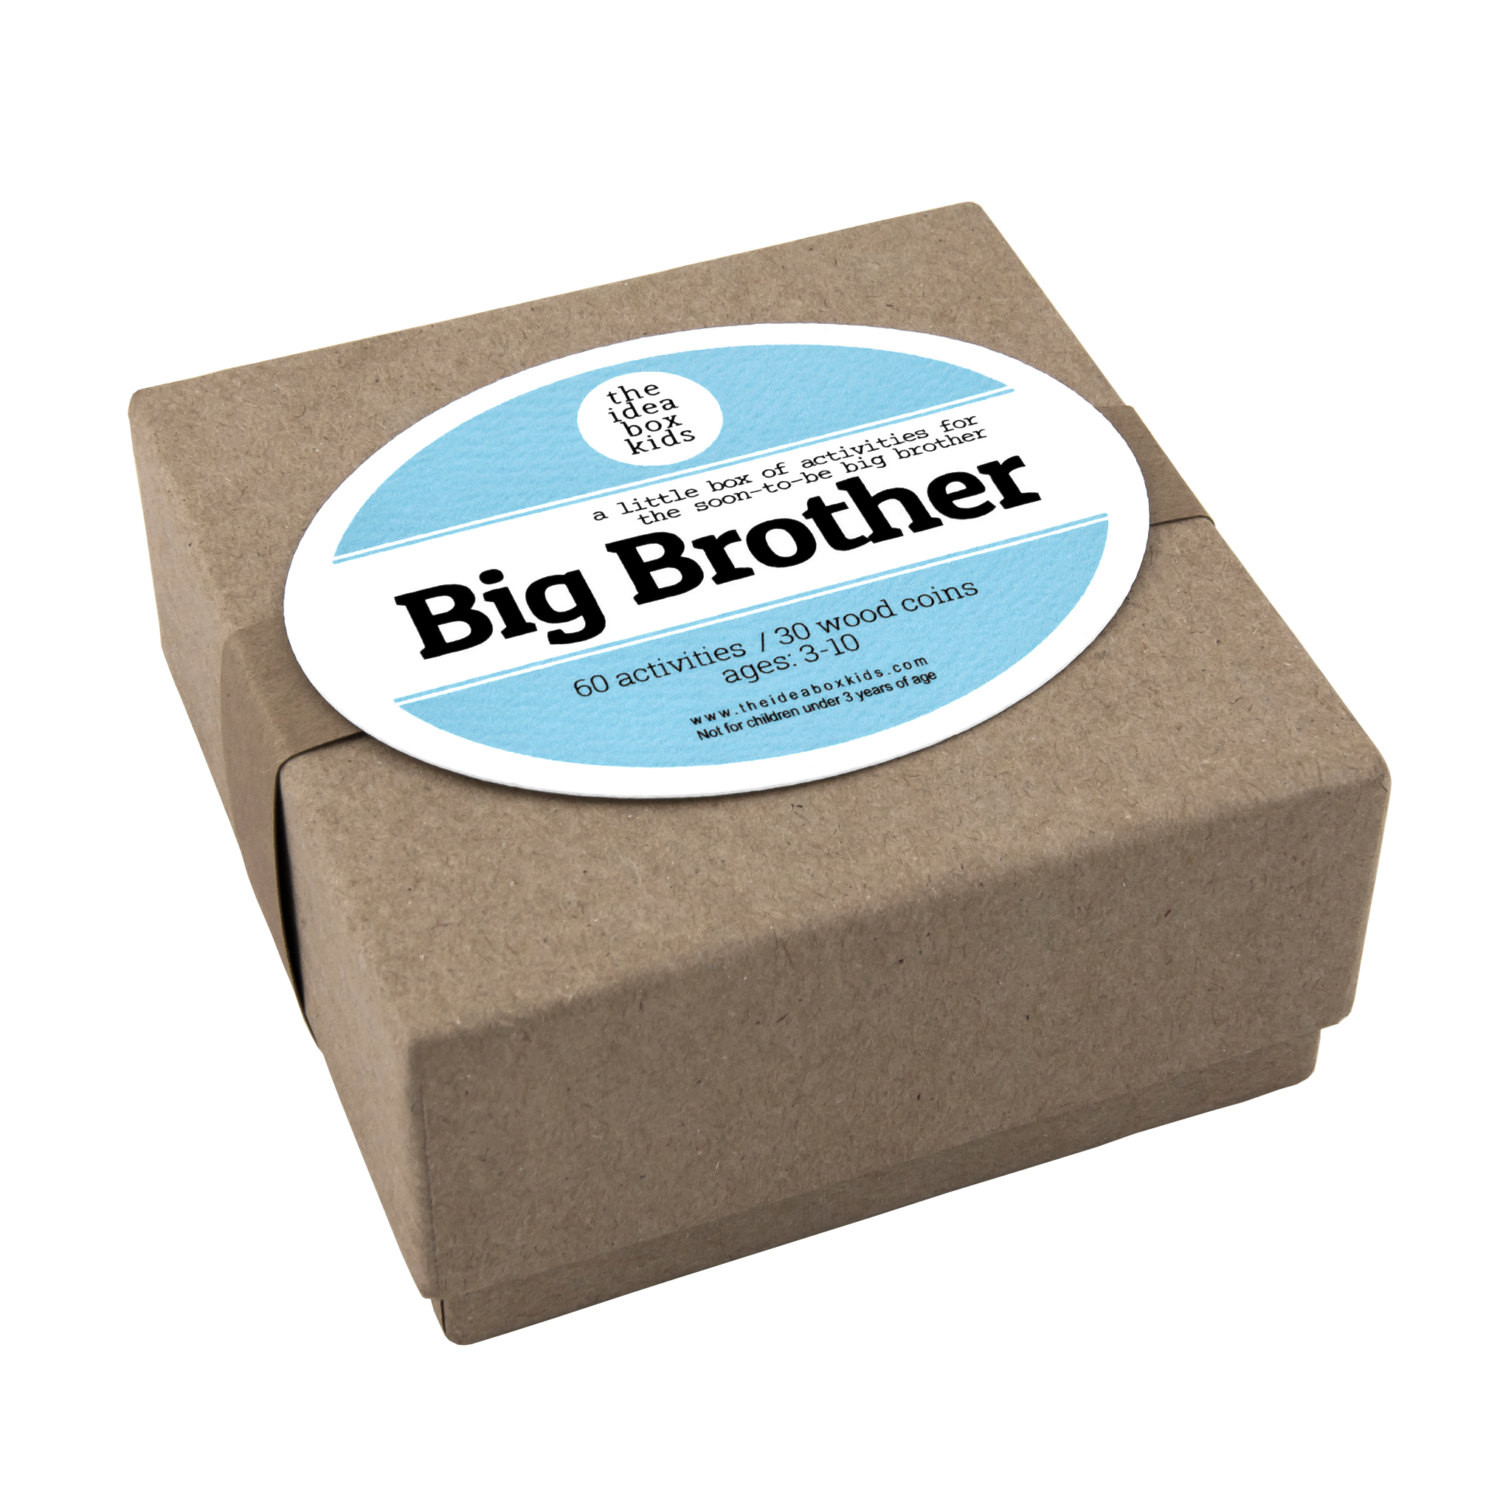 Gift Ideas For Big Brother From New Baby
 Big Brother Activities Gift for Big Brother Gift for New